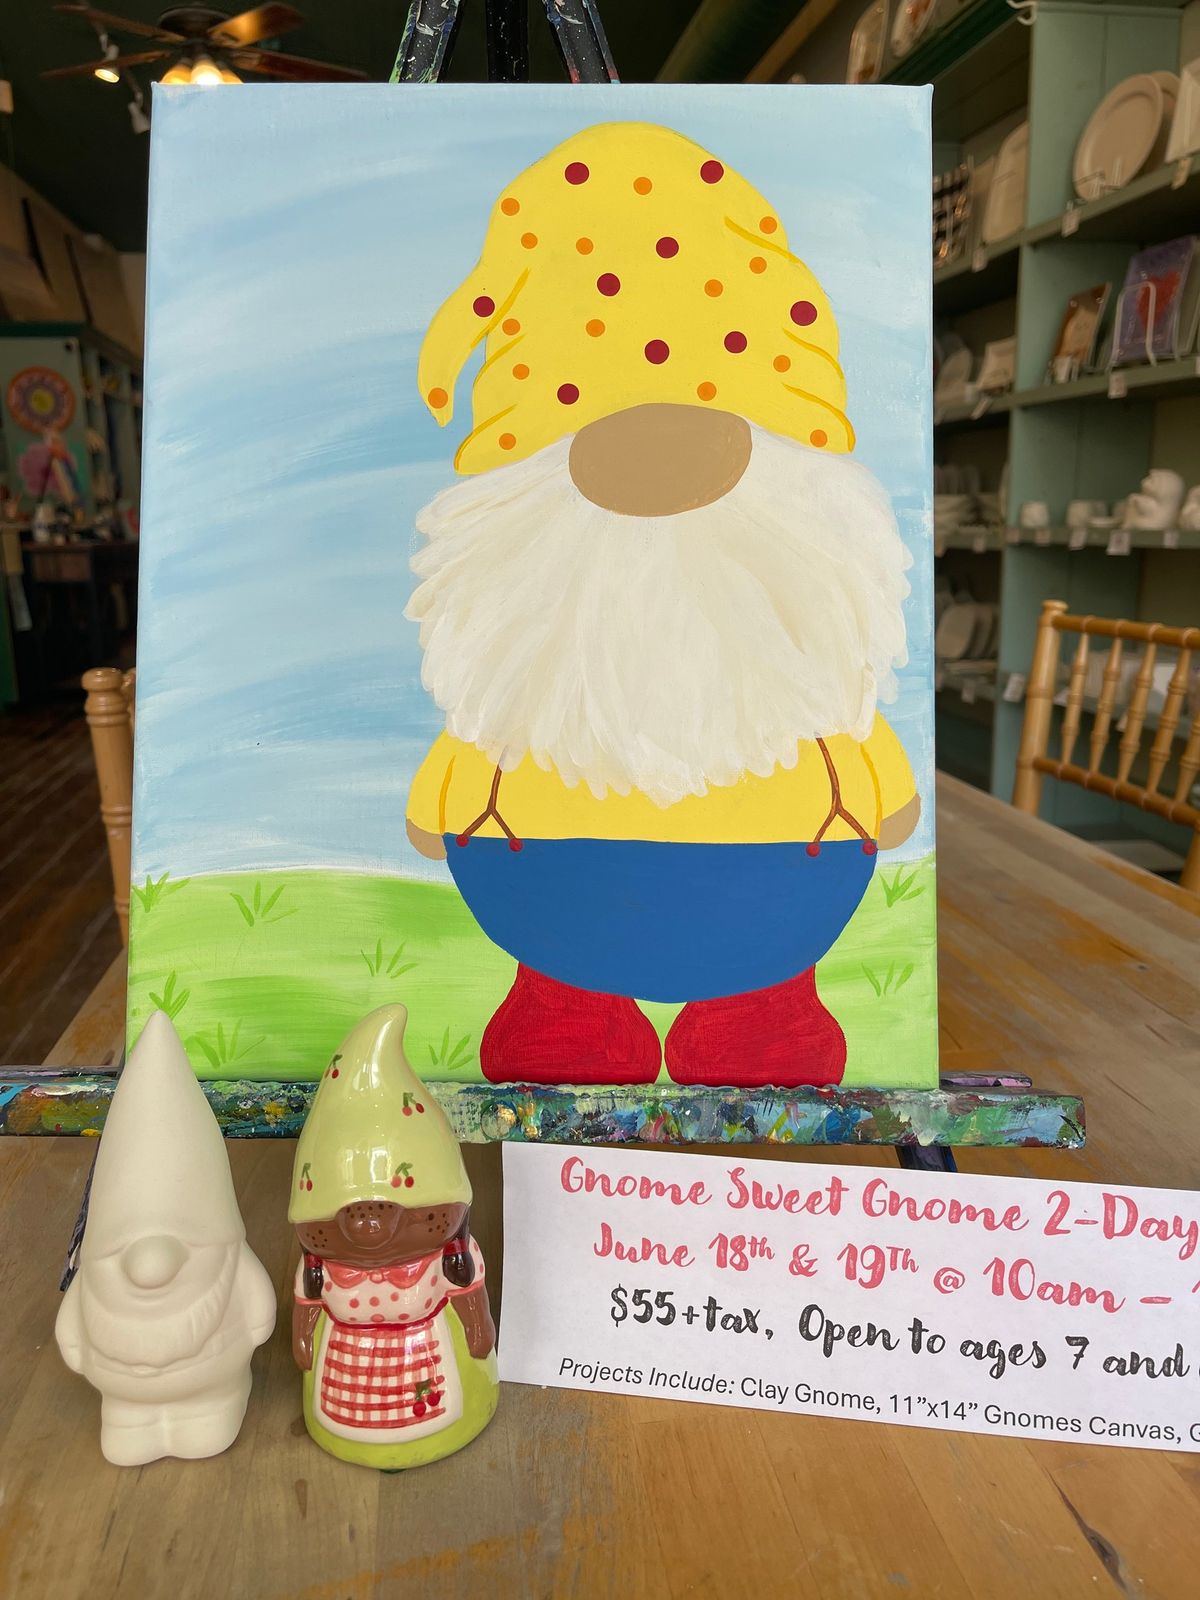 Gnome sweet Gnome 2-Day Kids Camp 